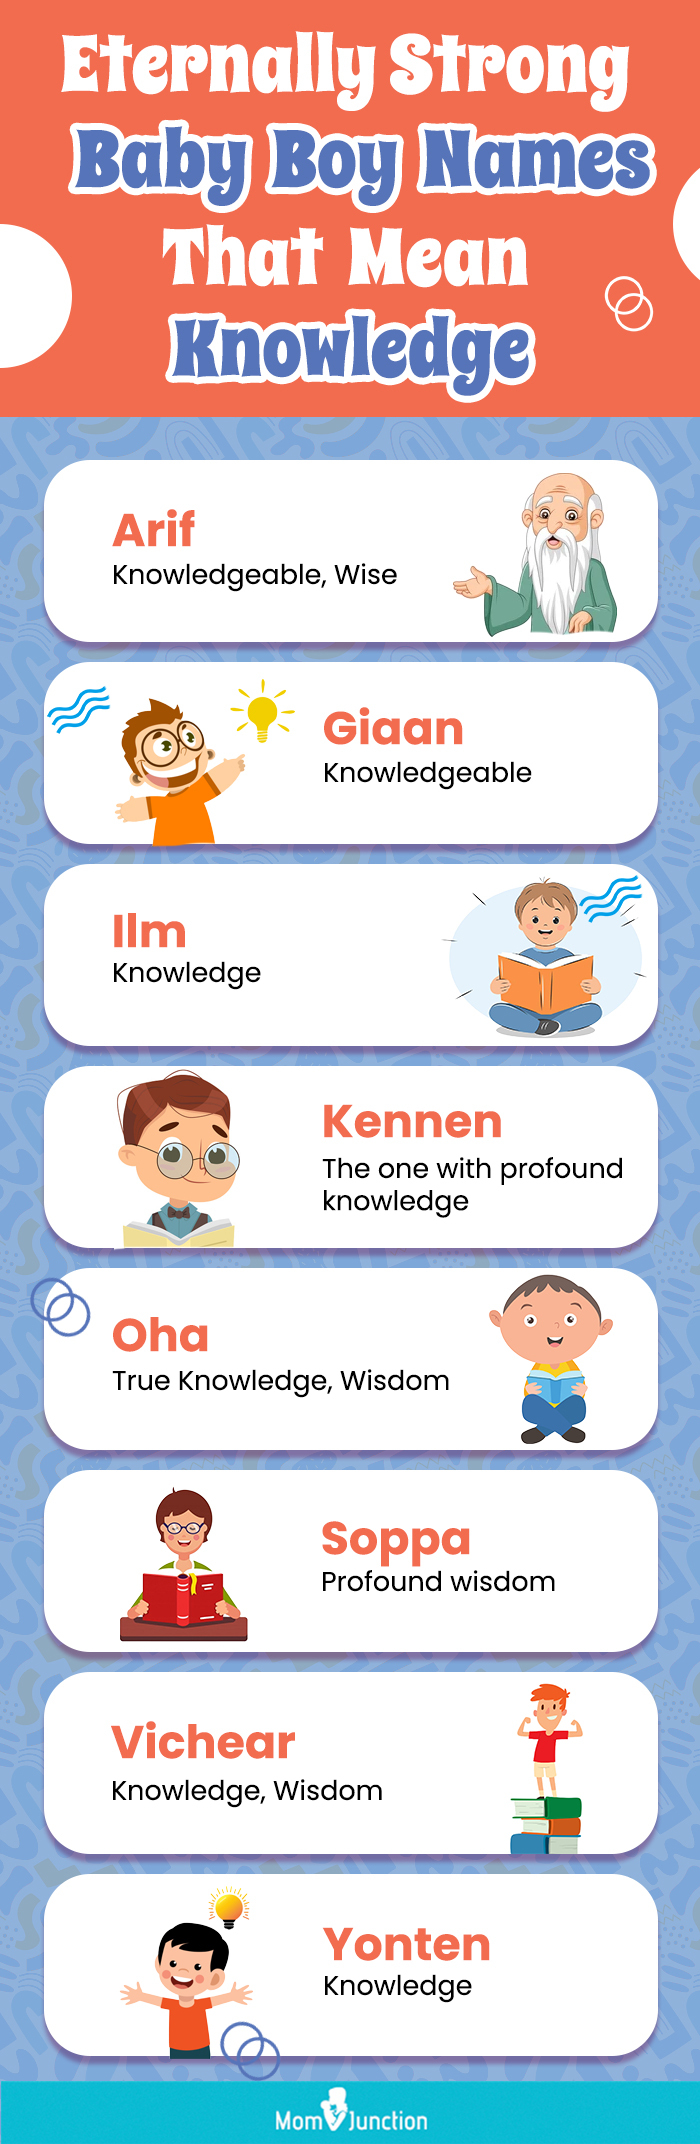 eternally strong baby boy names that mean knowledge (infographic)